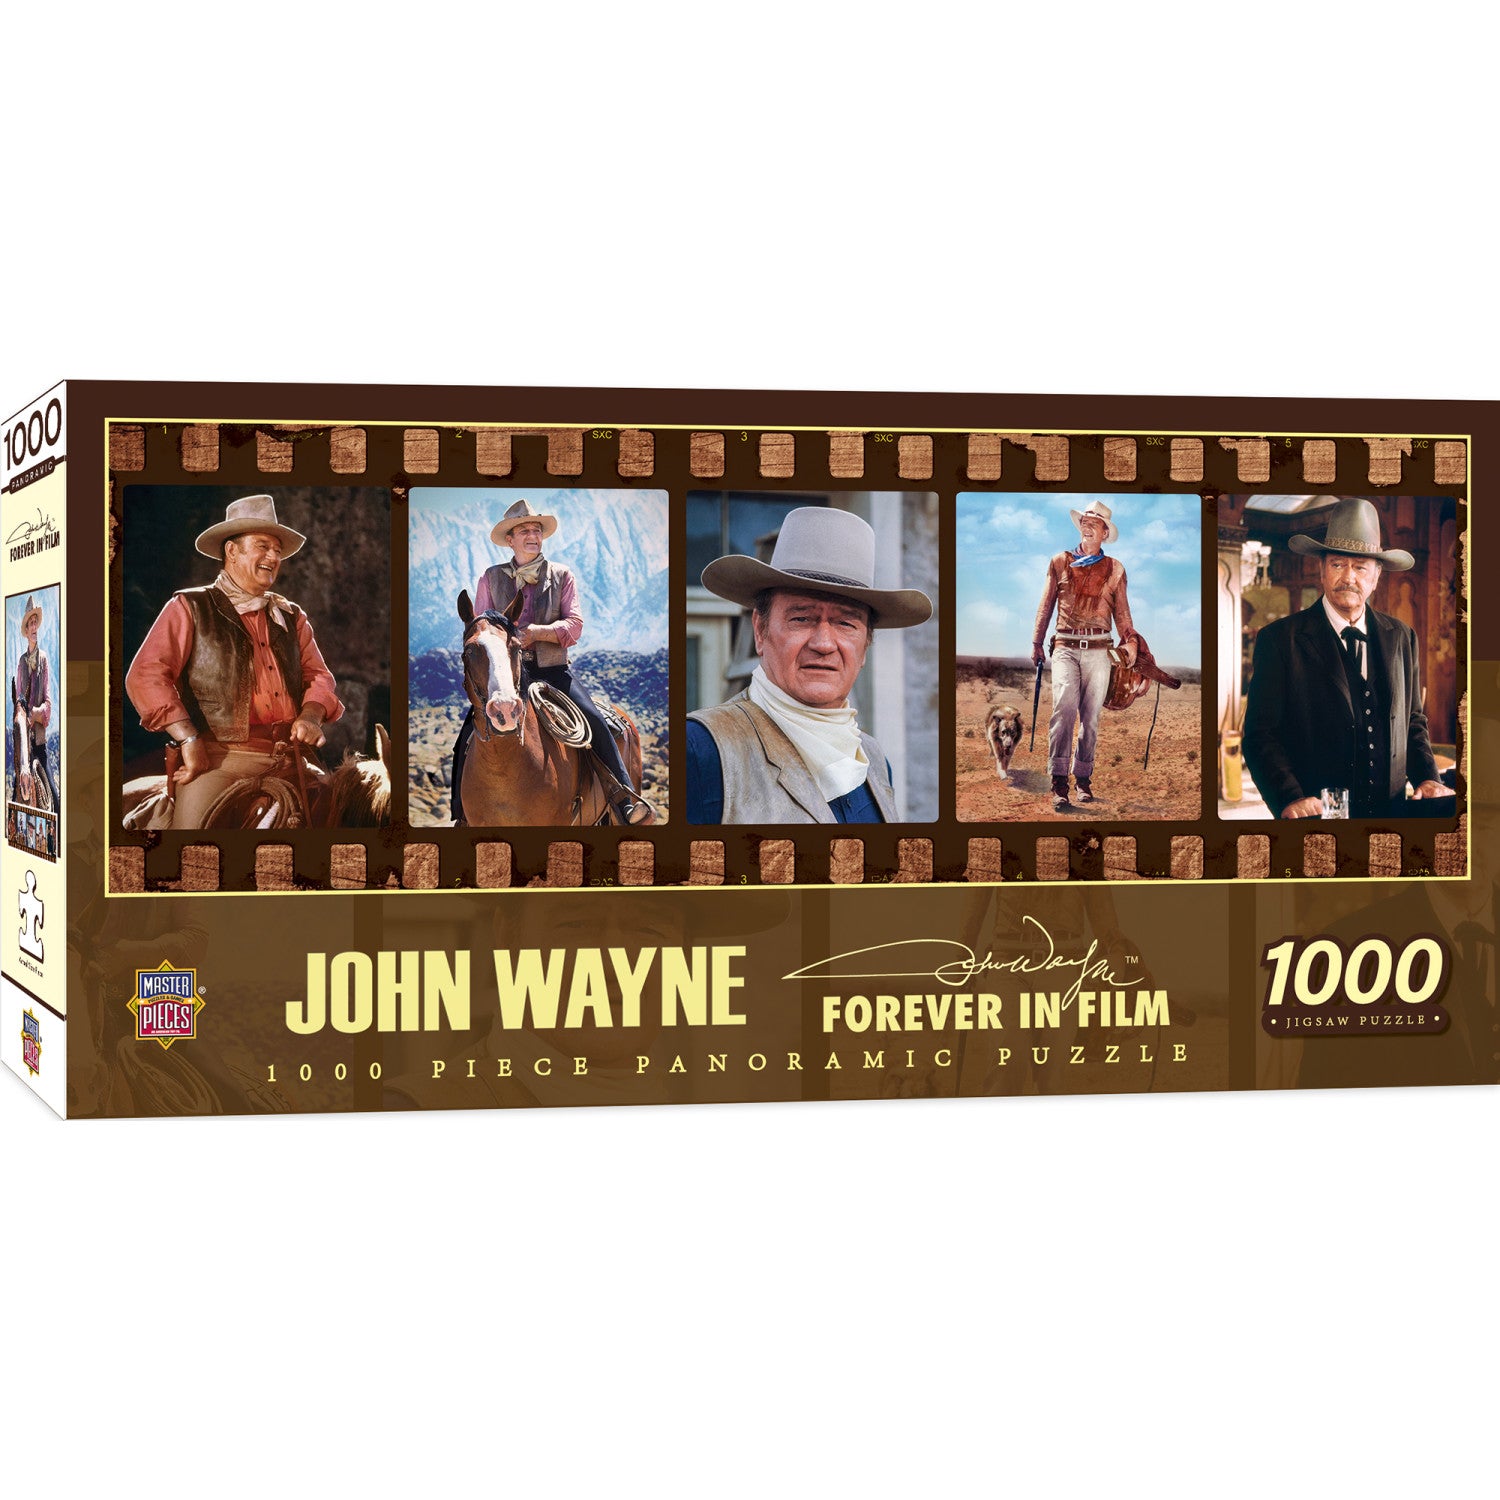 John Wayne Collection - Forever in Film 1000 Piece Panoramic Puzzle